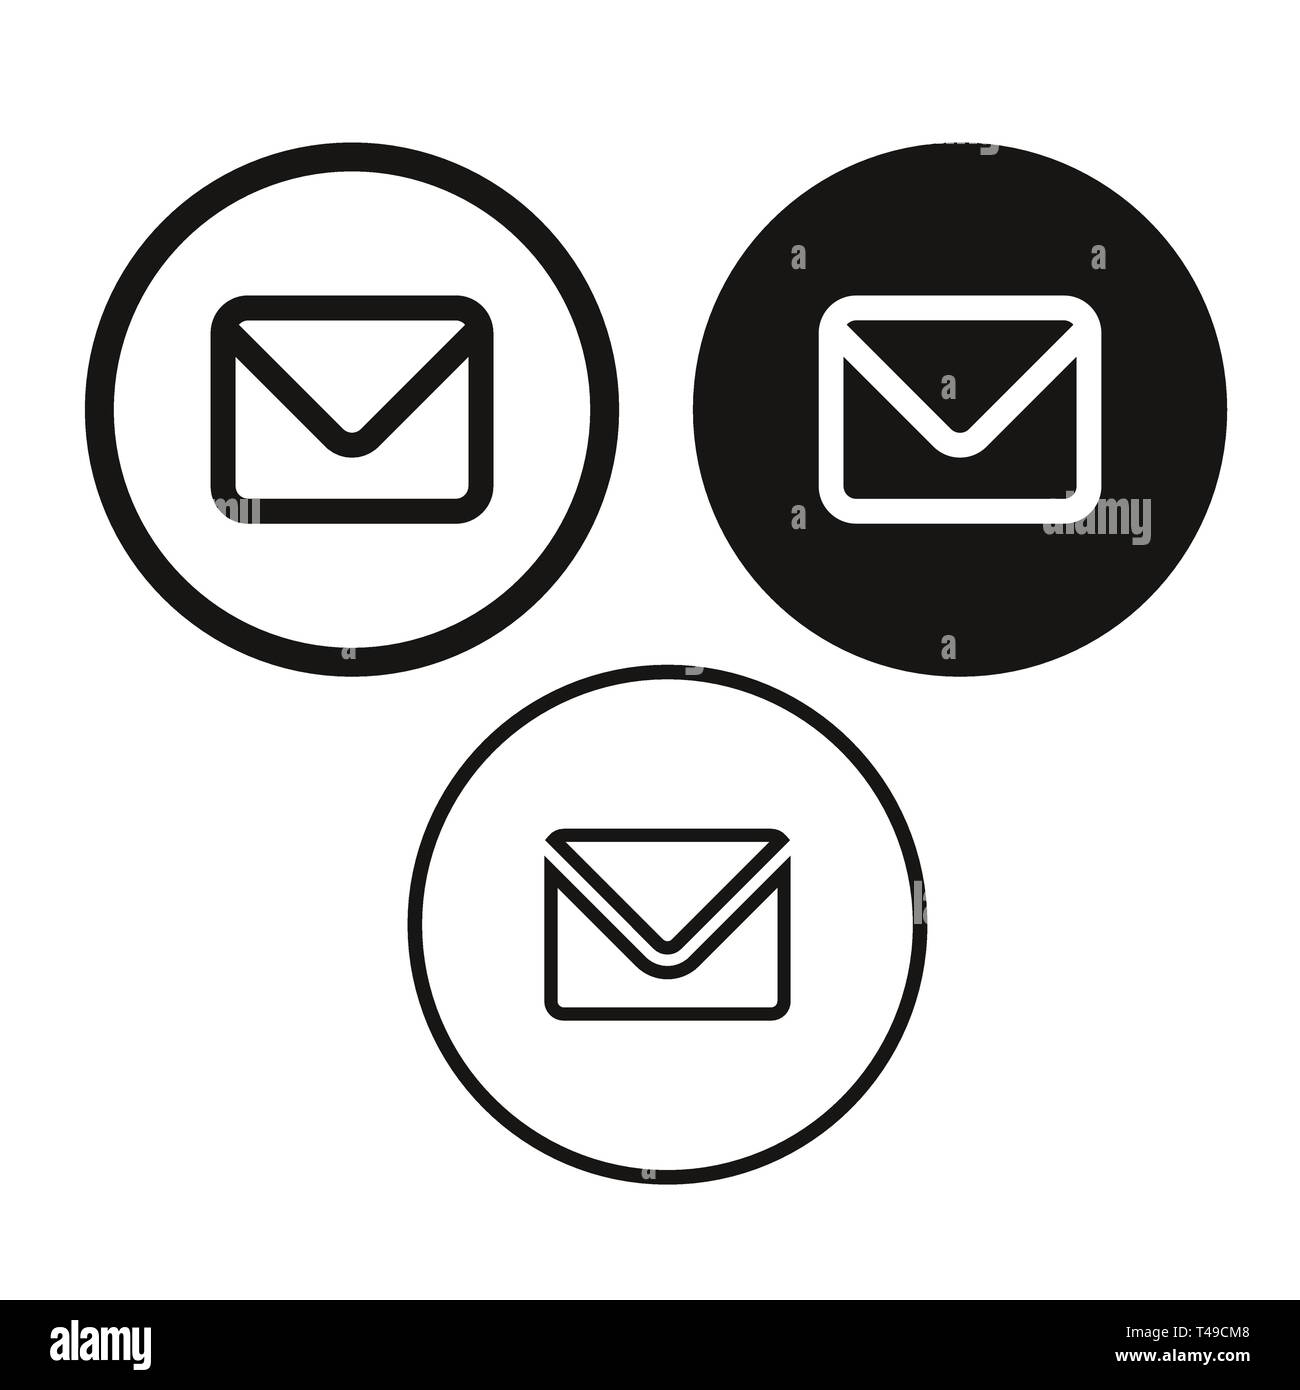 Email message icon vector Stock Vector